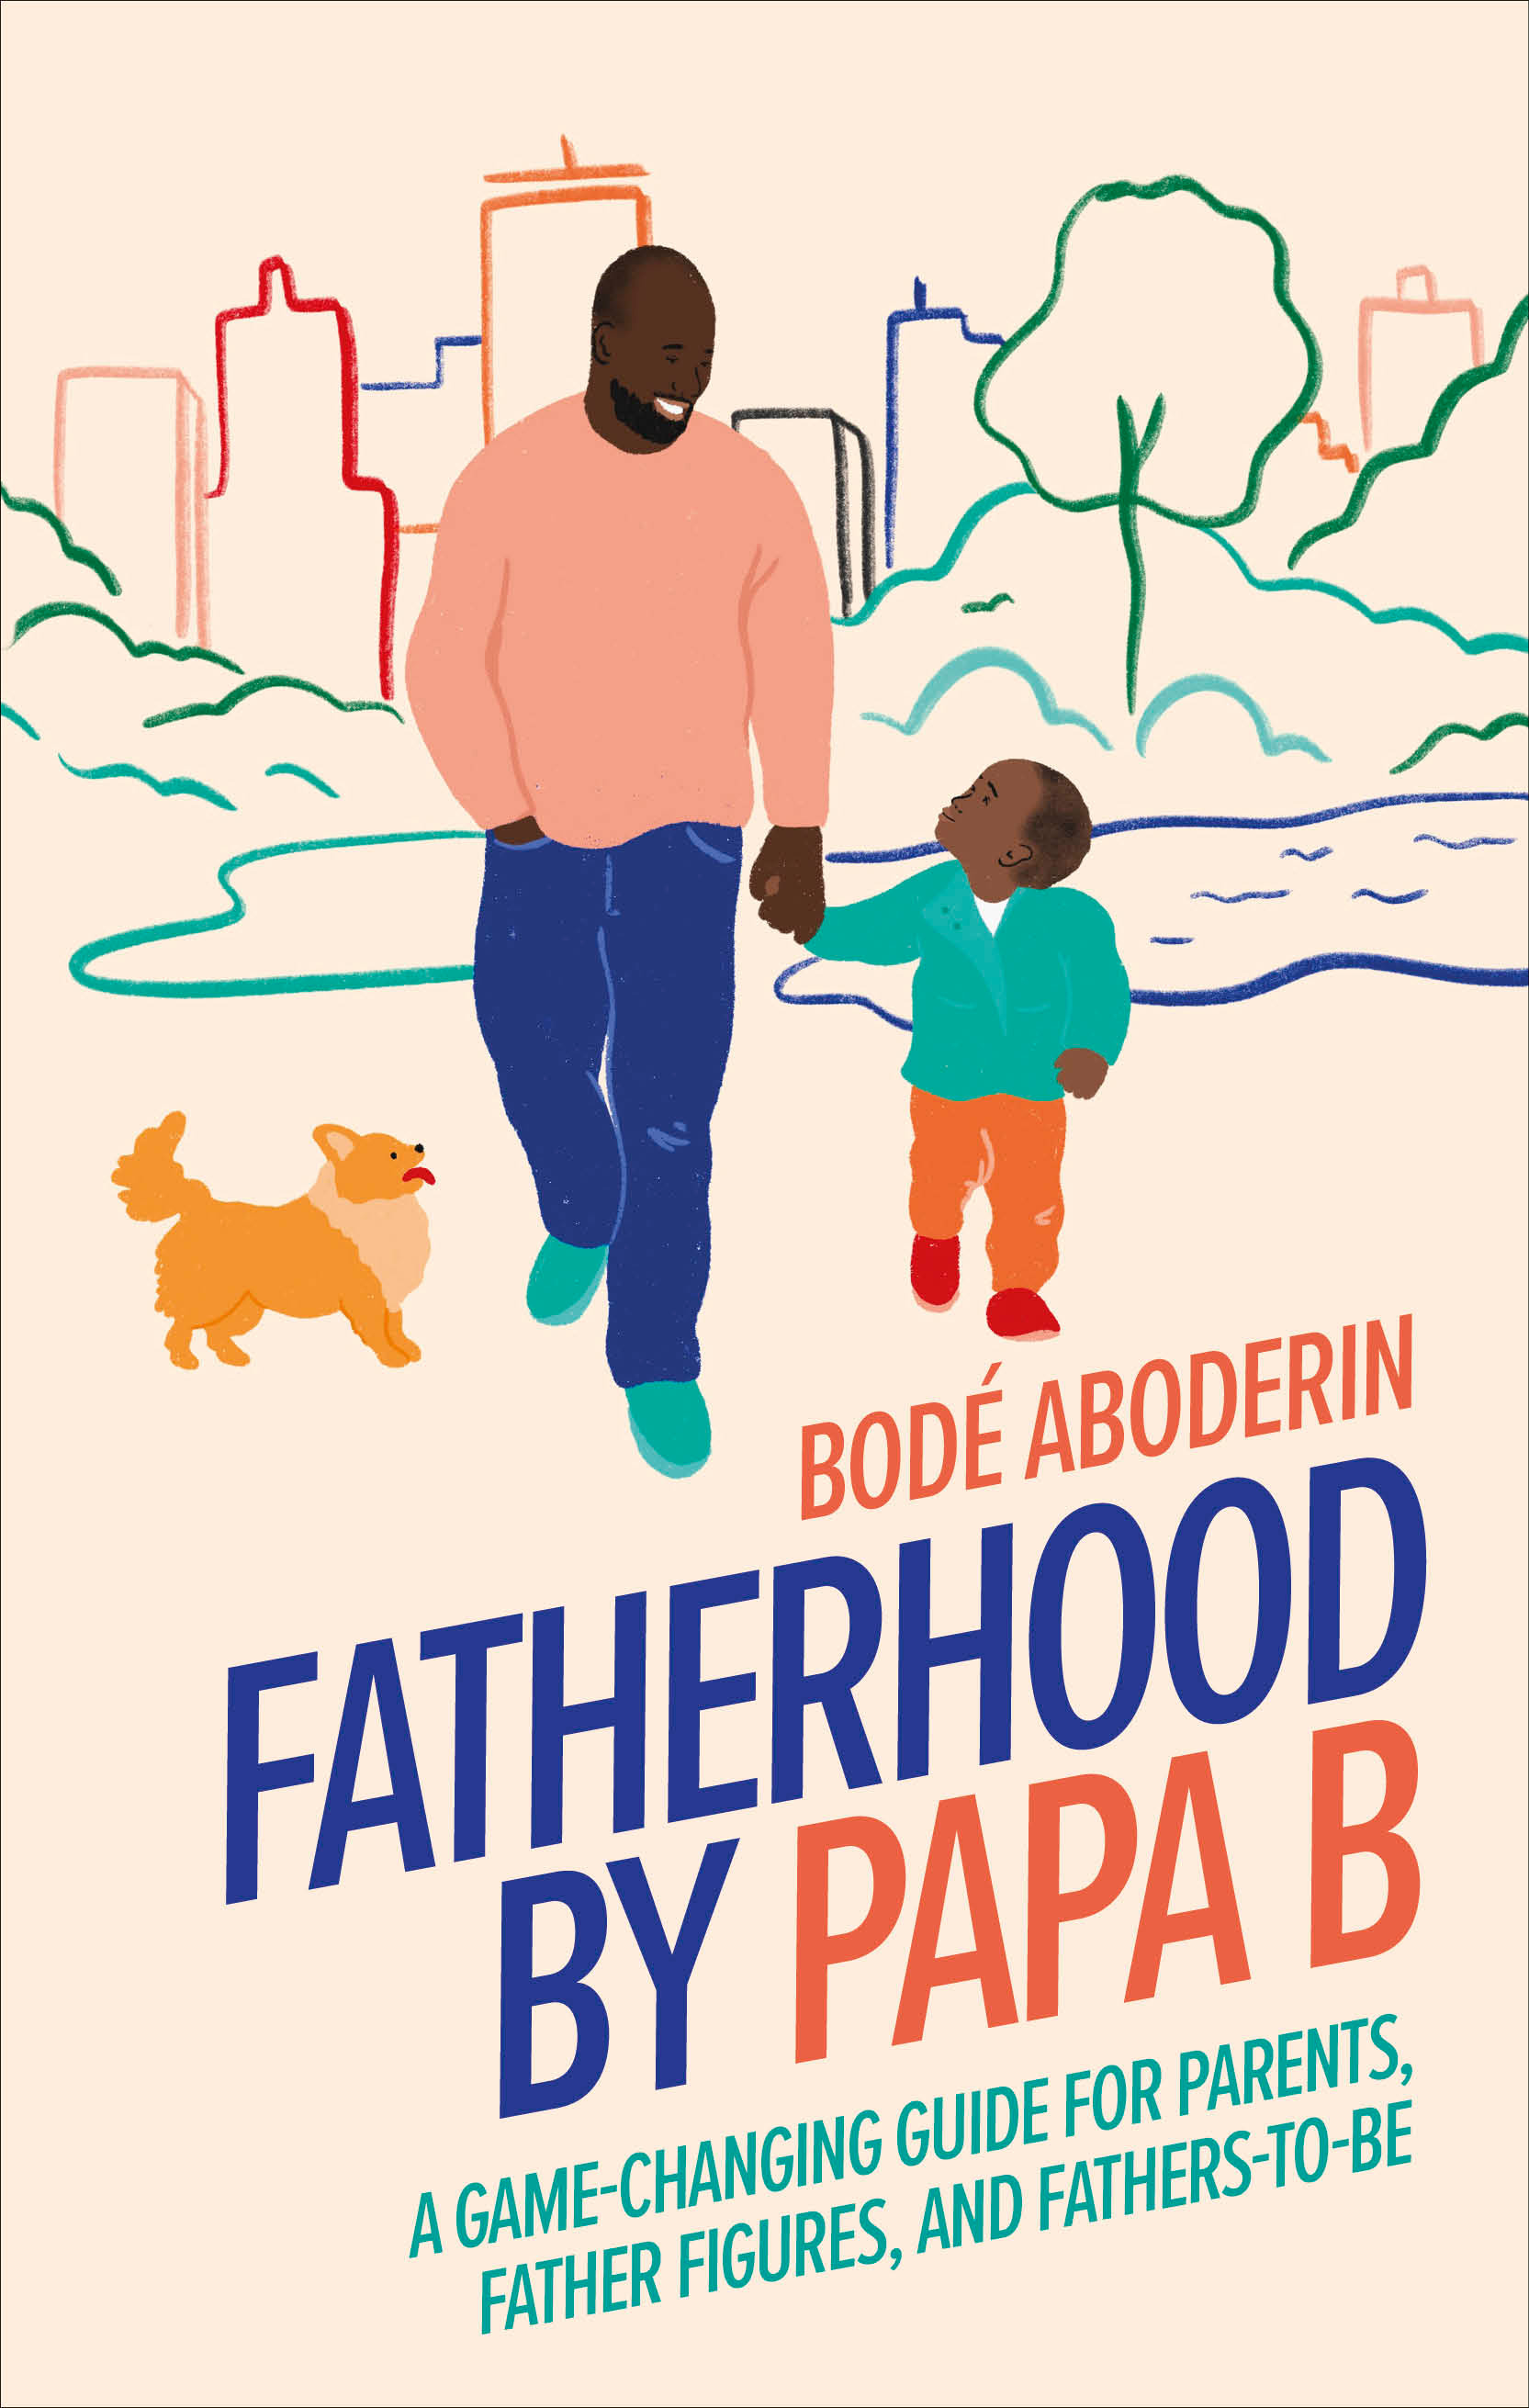 Fatherhood by Papa B : A Game-changing Guide for Parents, Father Figures and Fathers-to-be | Parenting